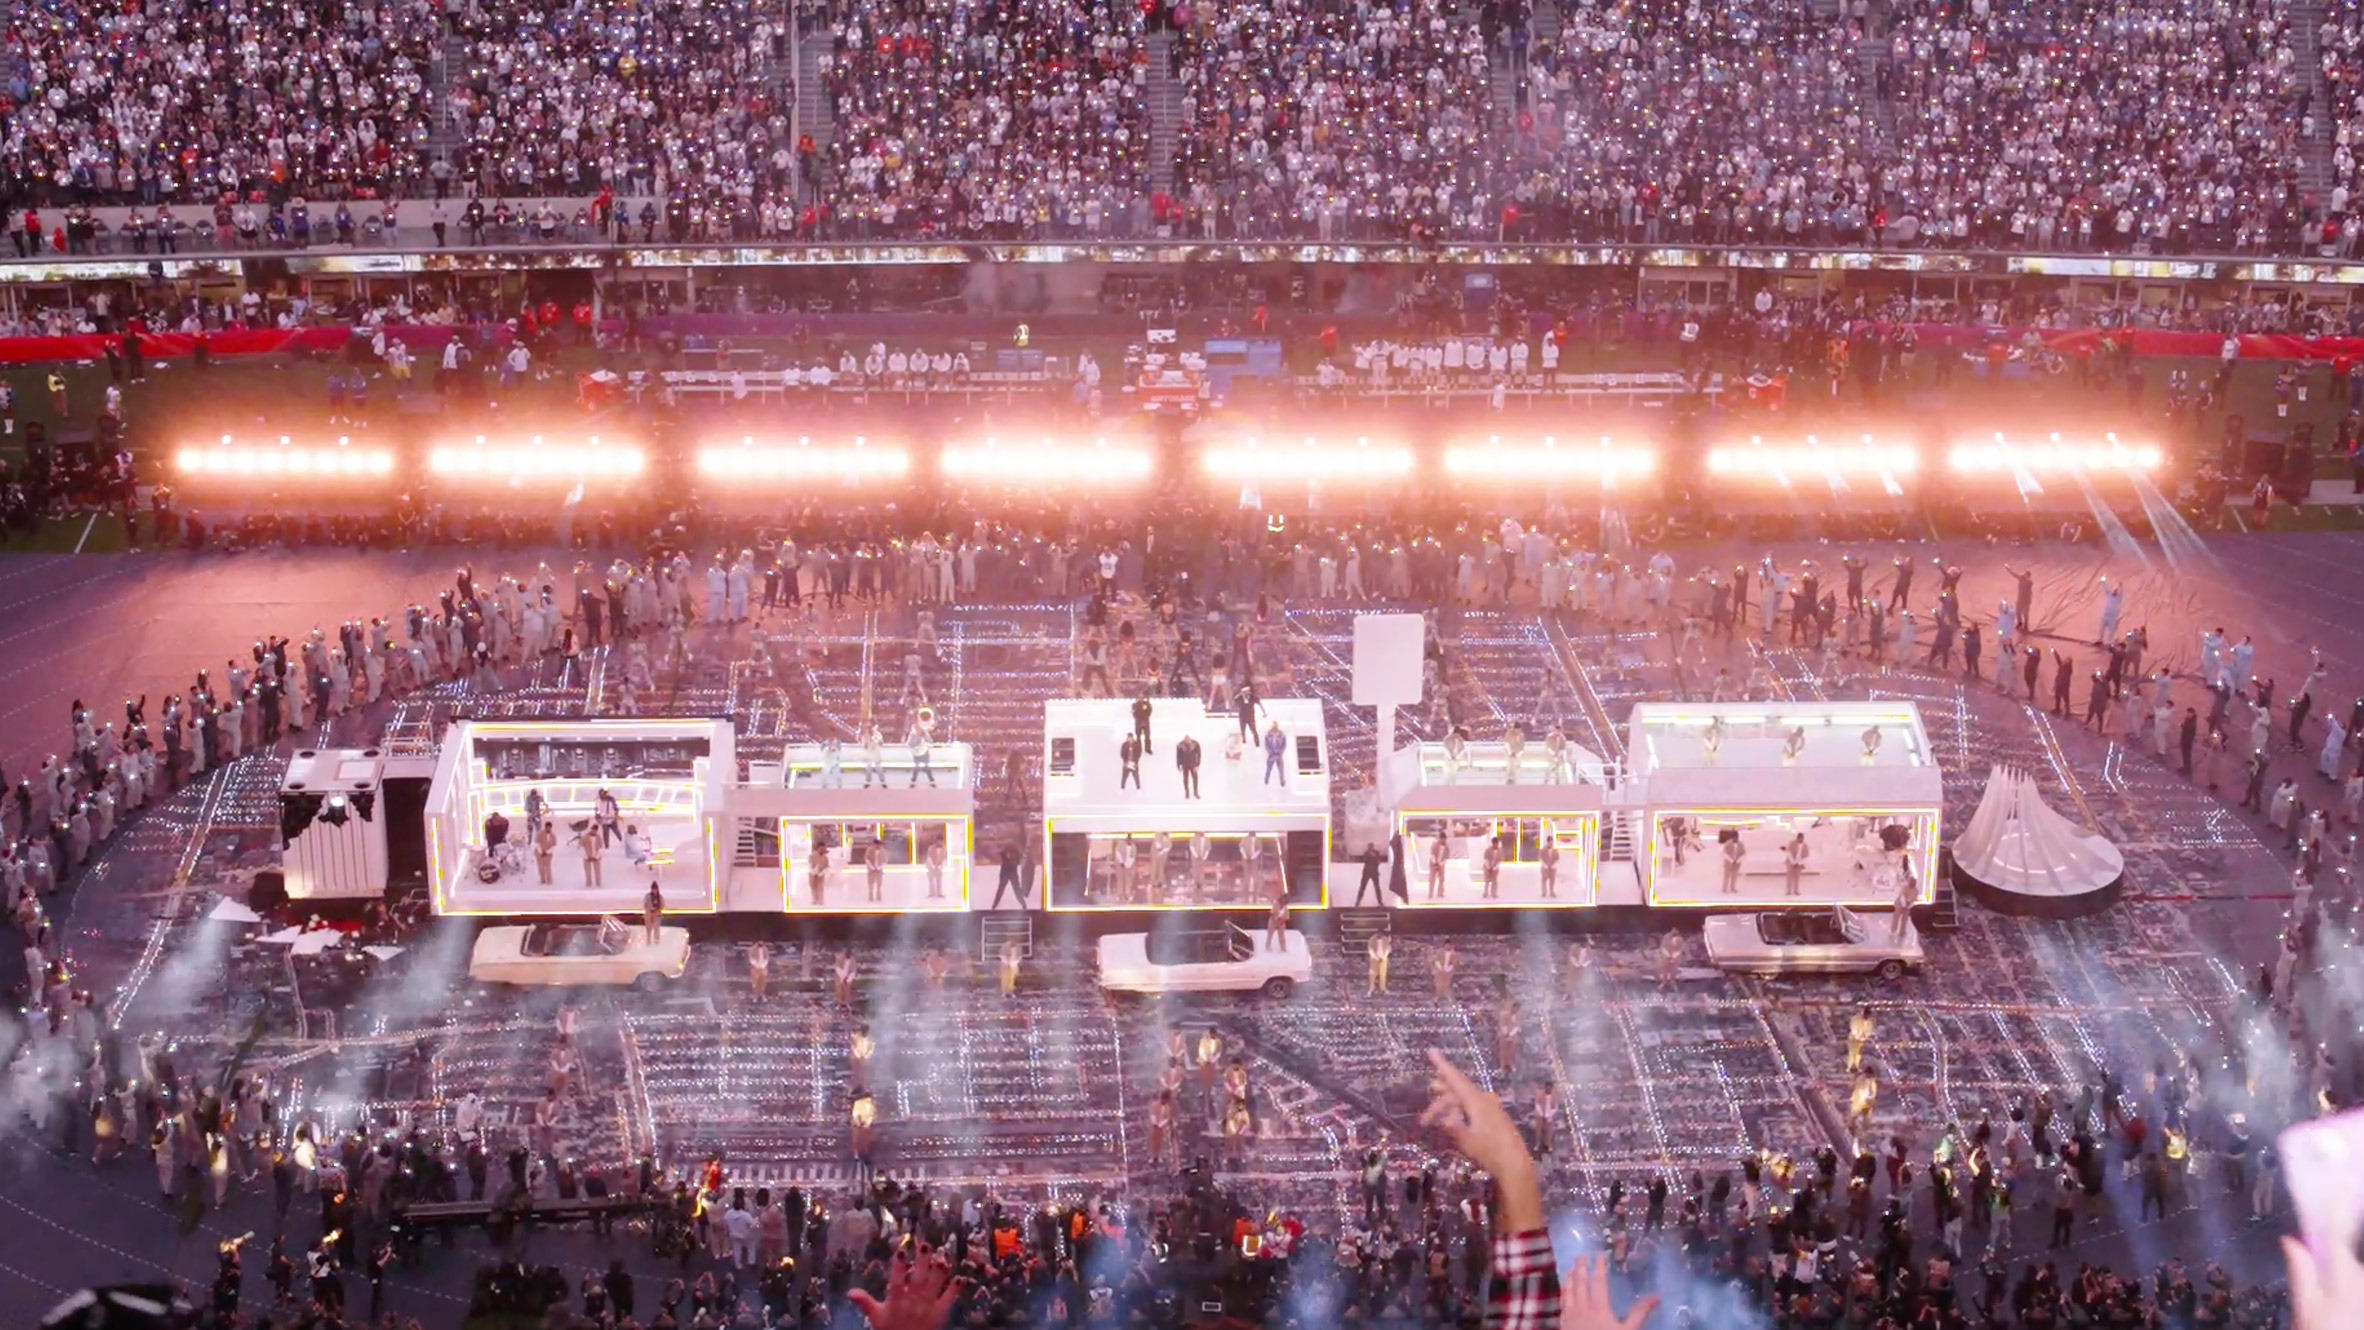 The Weeknd Super Bowl Halftime Show: The Weeknd 'Built a Stage in the  Stadium